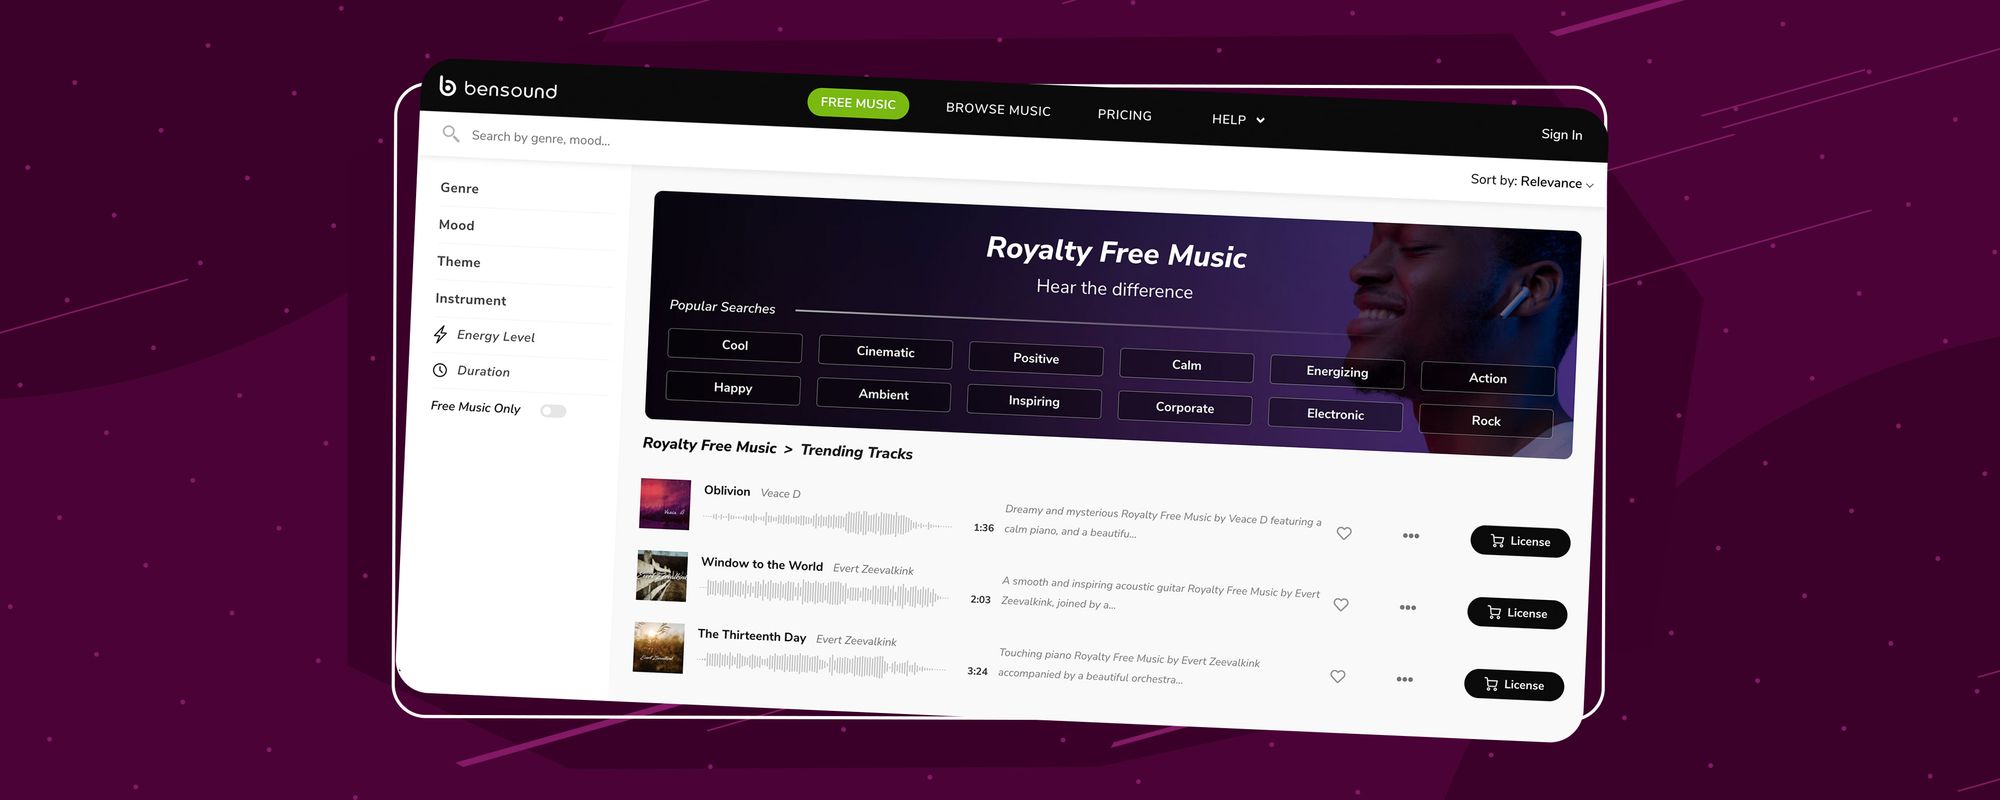 The Bensound royalty-free music website homepage